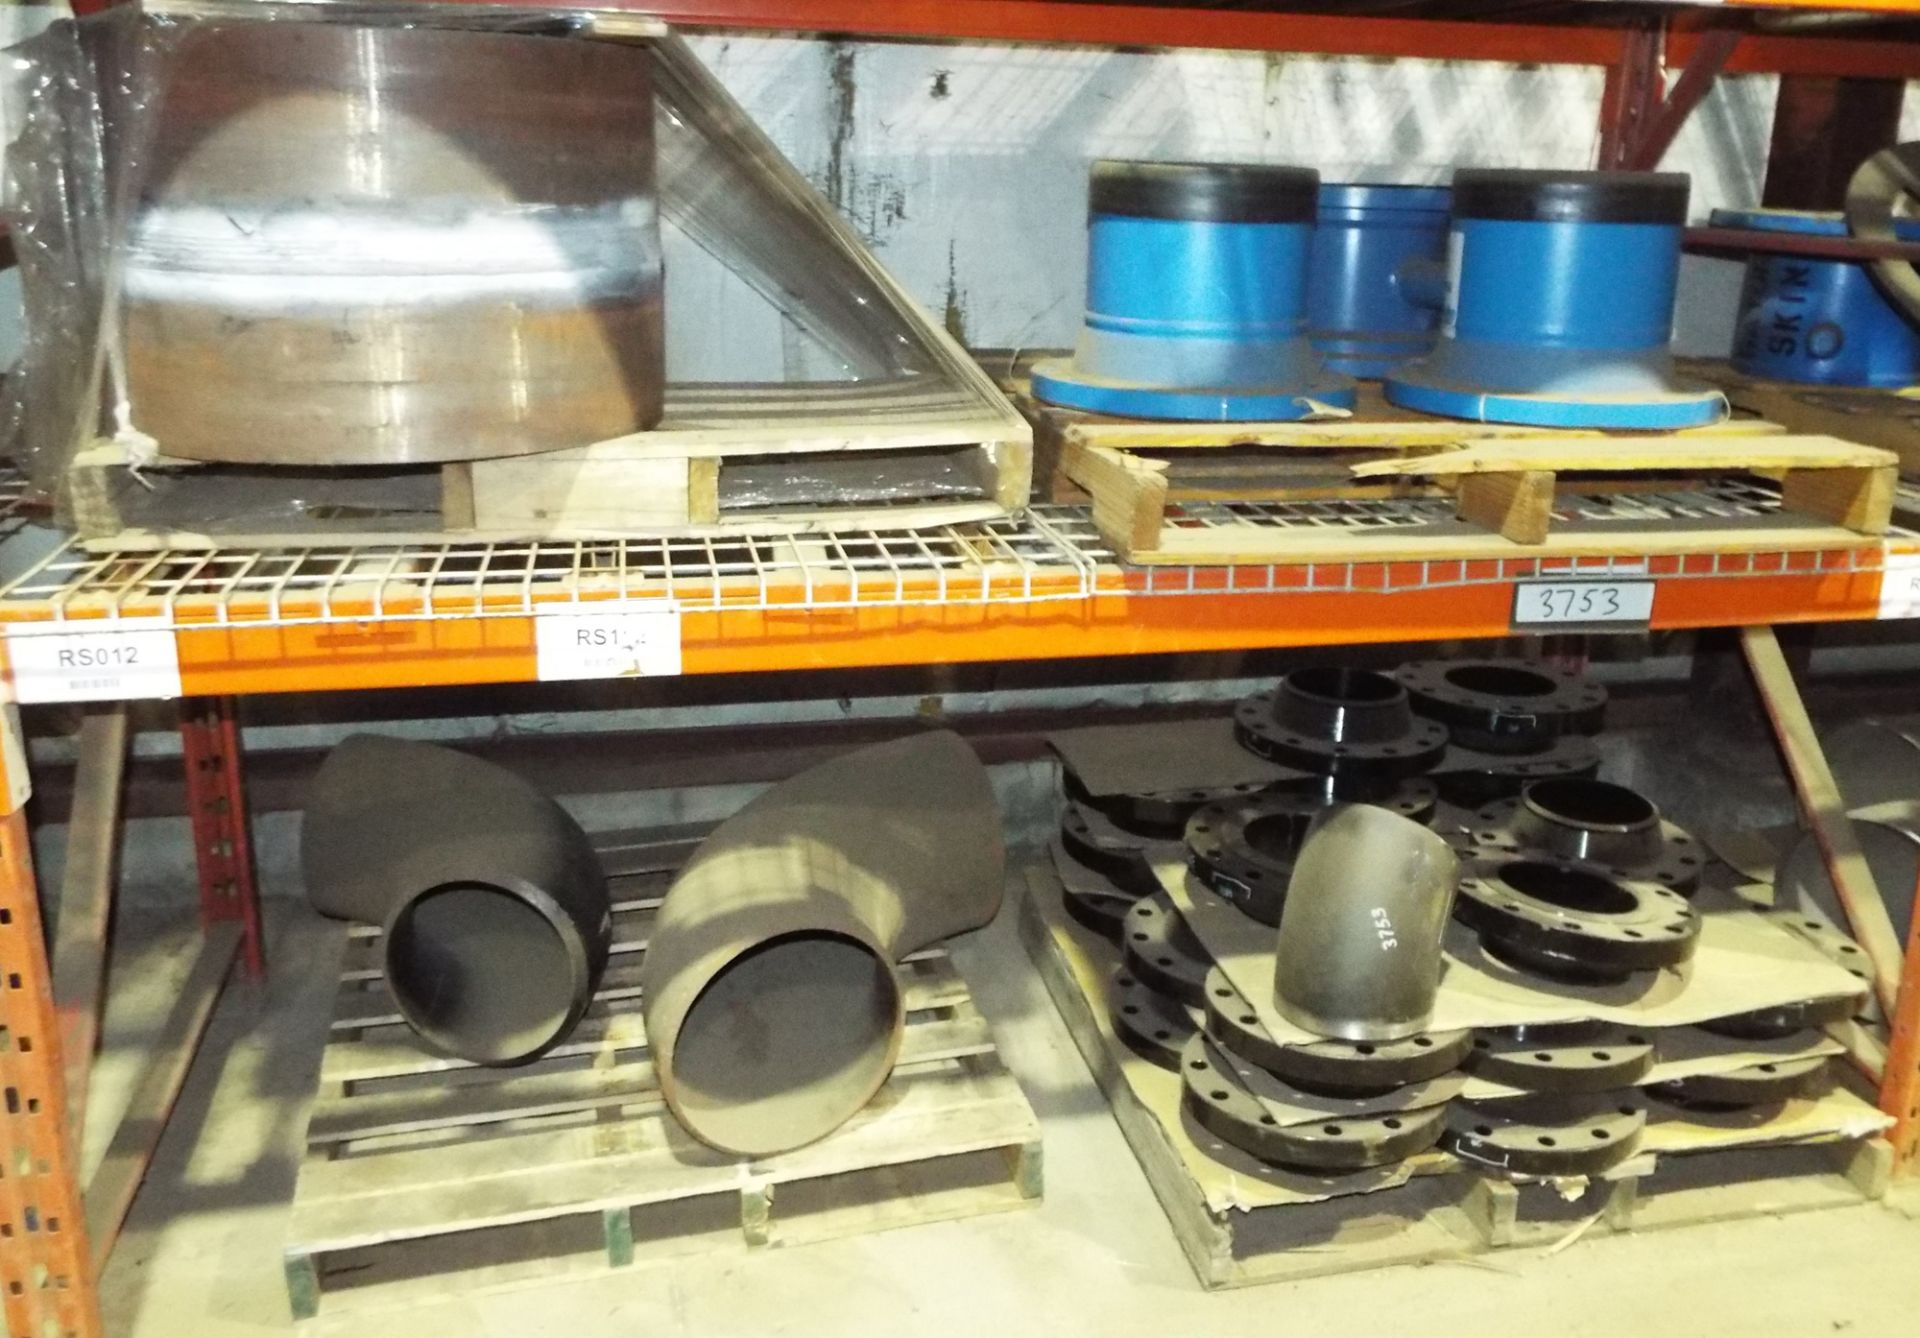 LOT/ CONTENTS OF RACK INCLUDING PIPES AND PIPE FITTING HARDWARE - Image 2 of 3